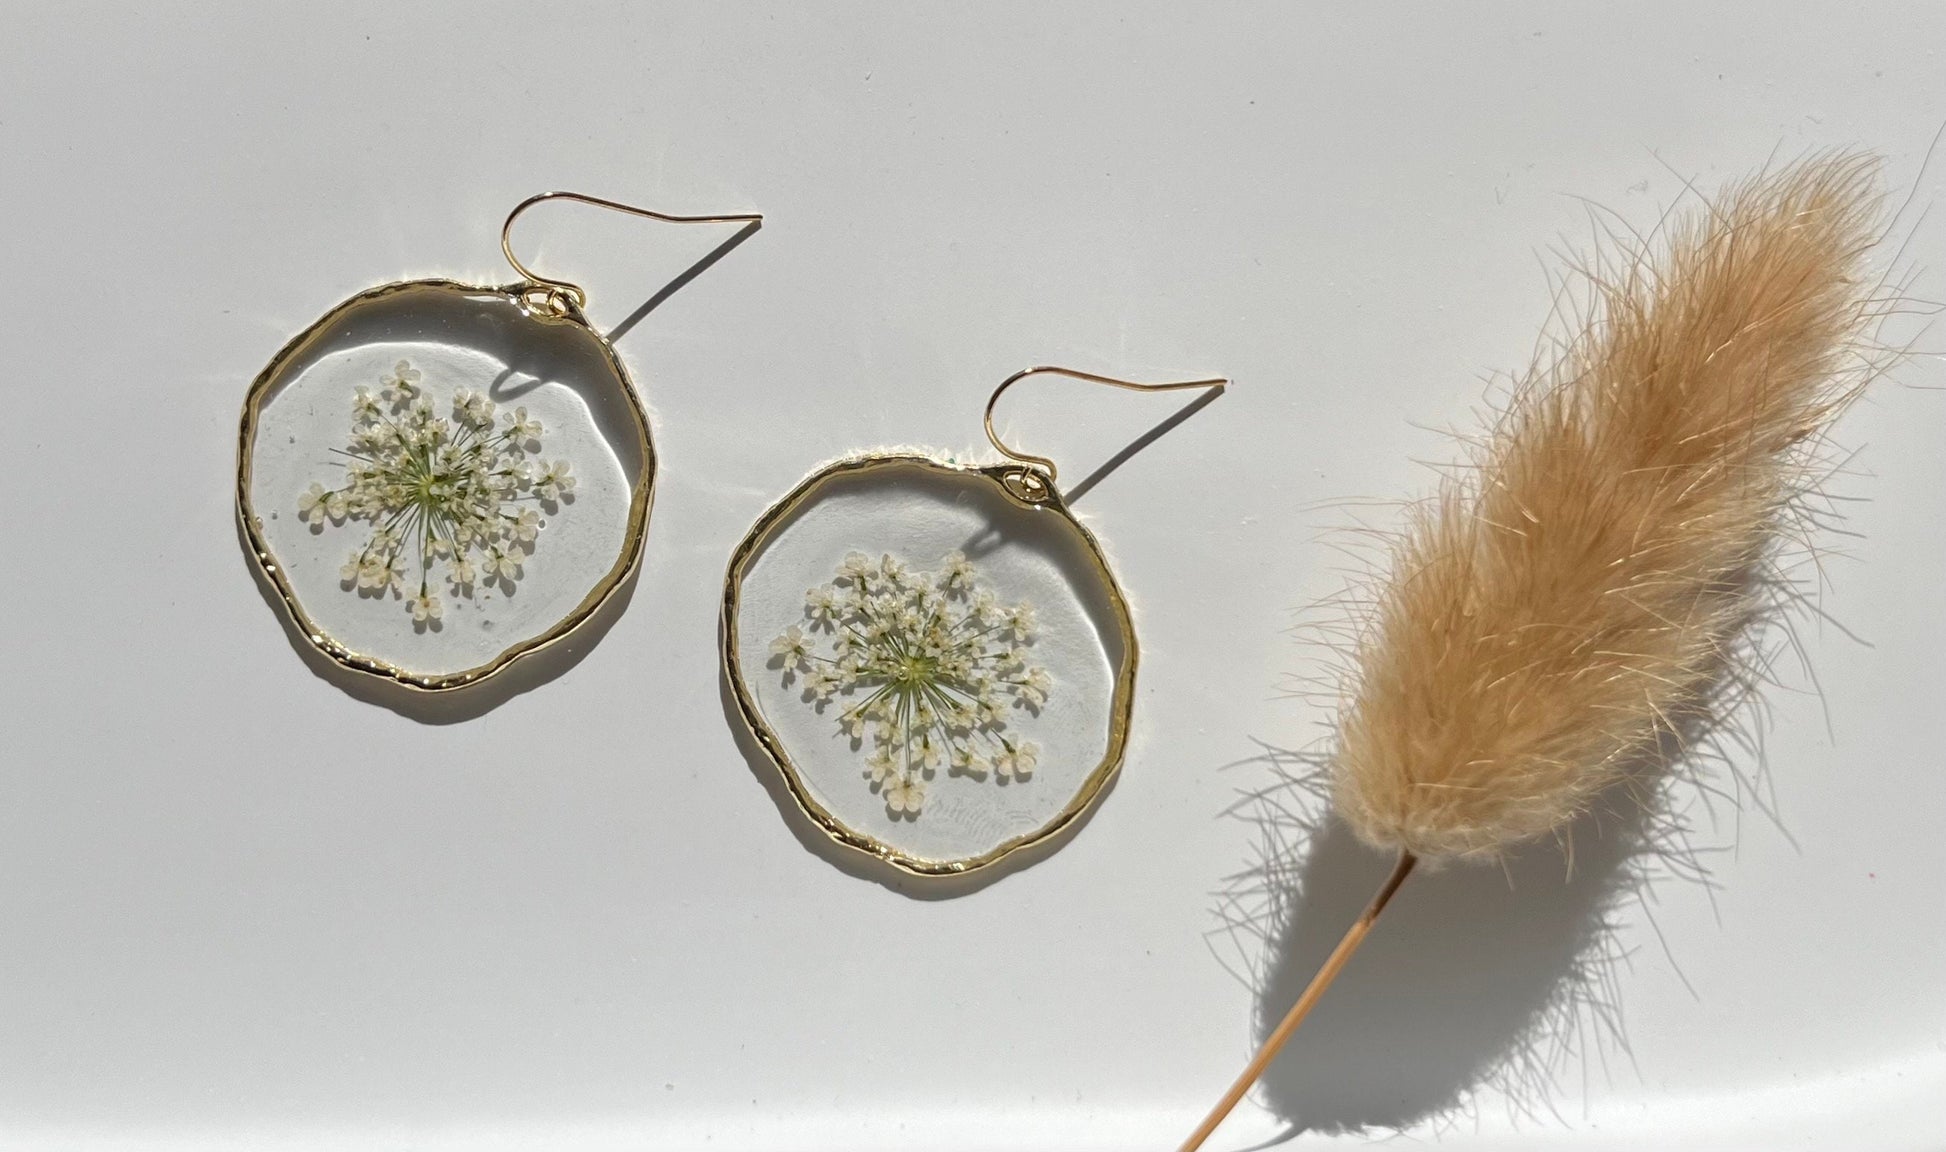 Handmade minimalist Earrings. Made with pressed Queen Anne’s Lace flowers. Hypoallergenic Earrings. 14K gold Plated.